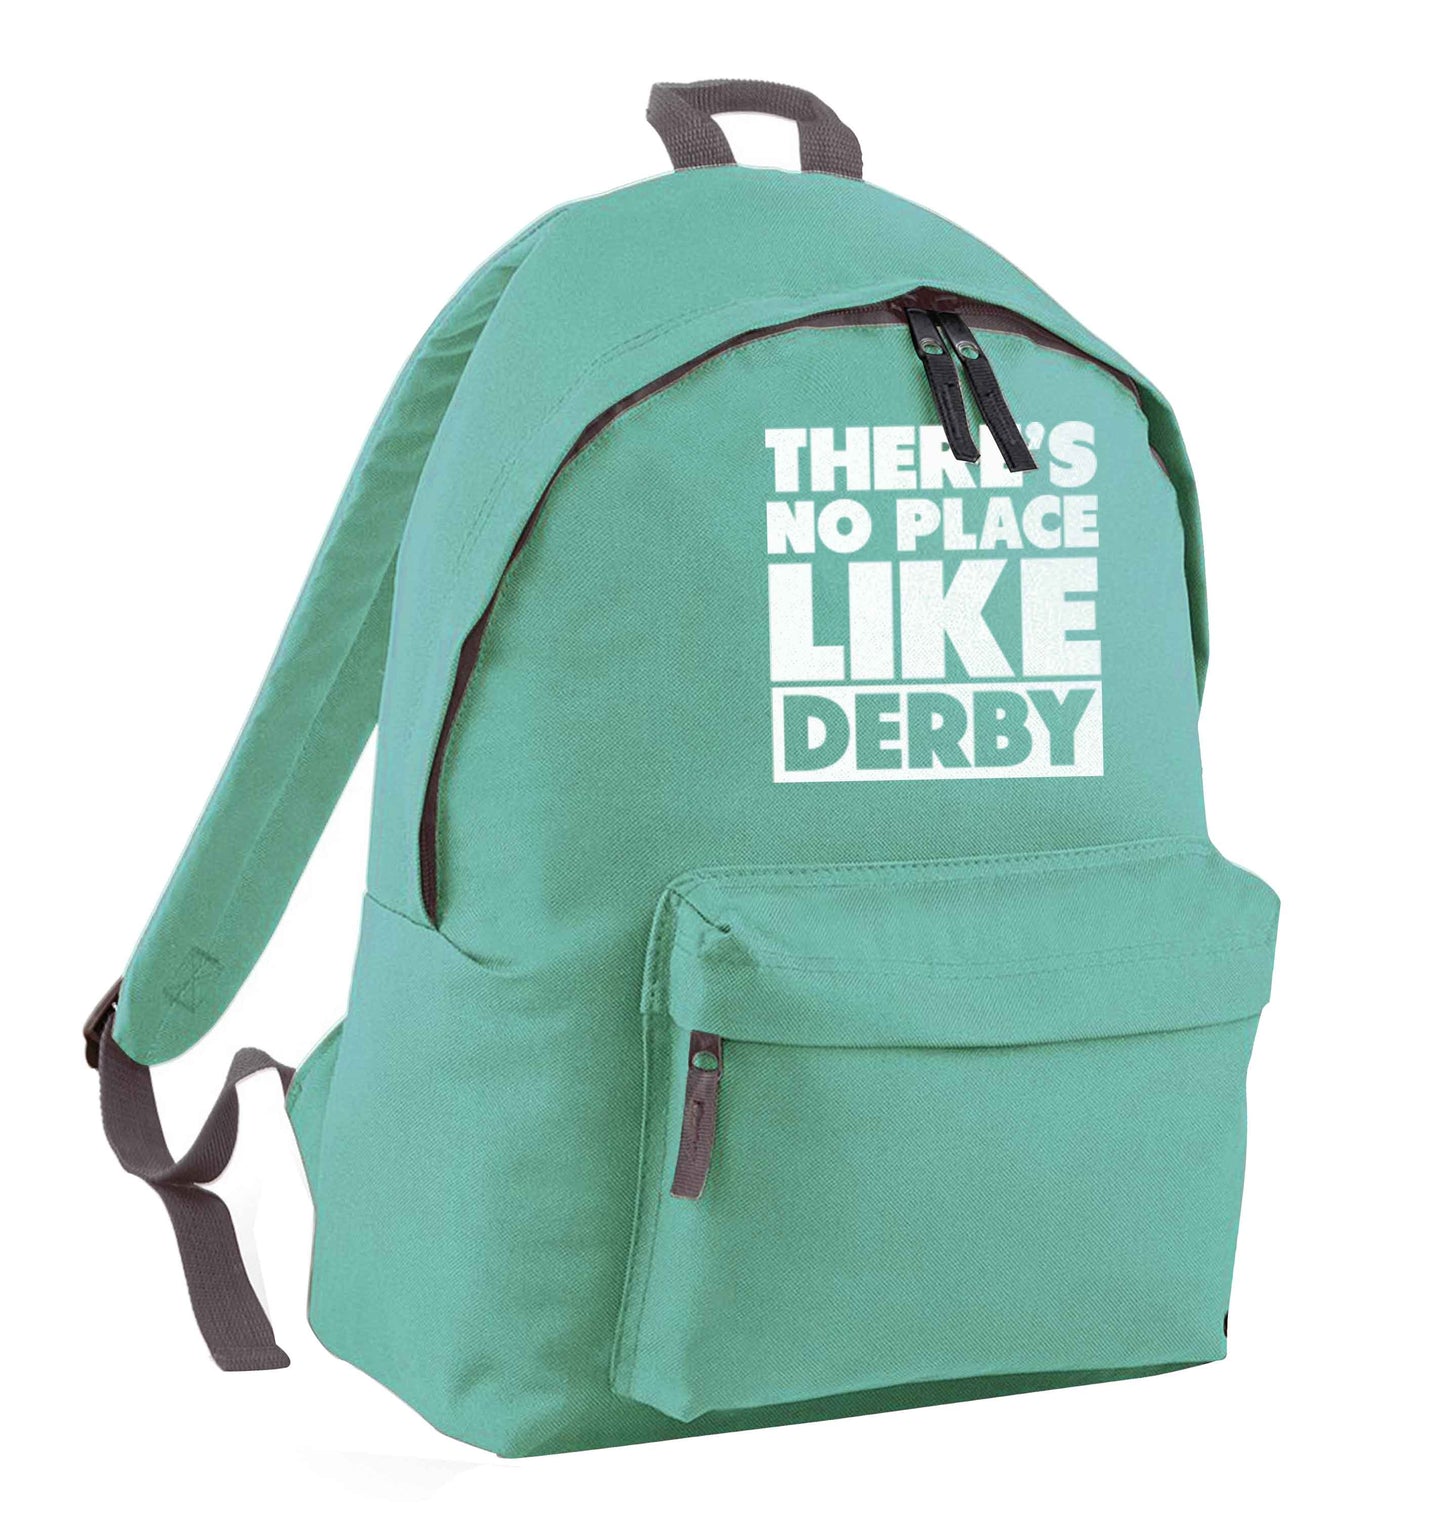 There's no place like Derby mint adults backpack